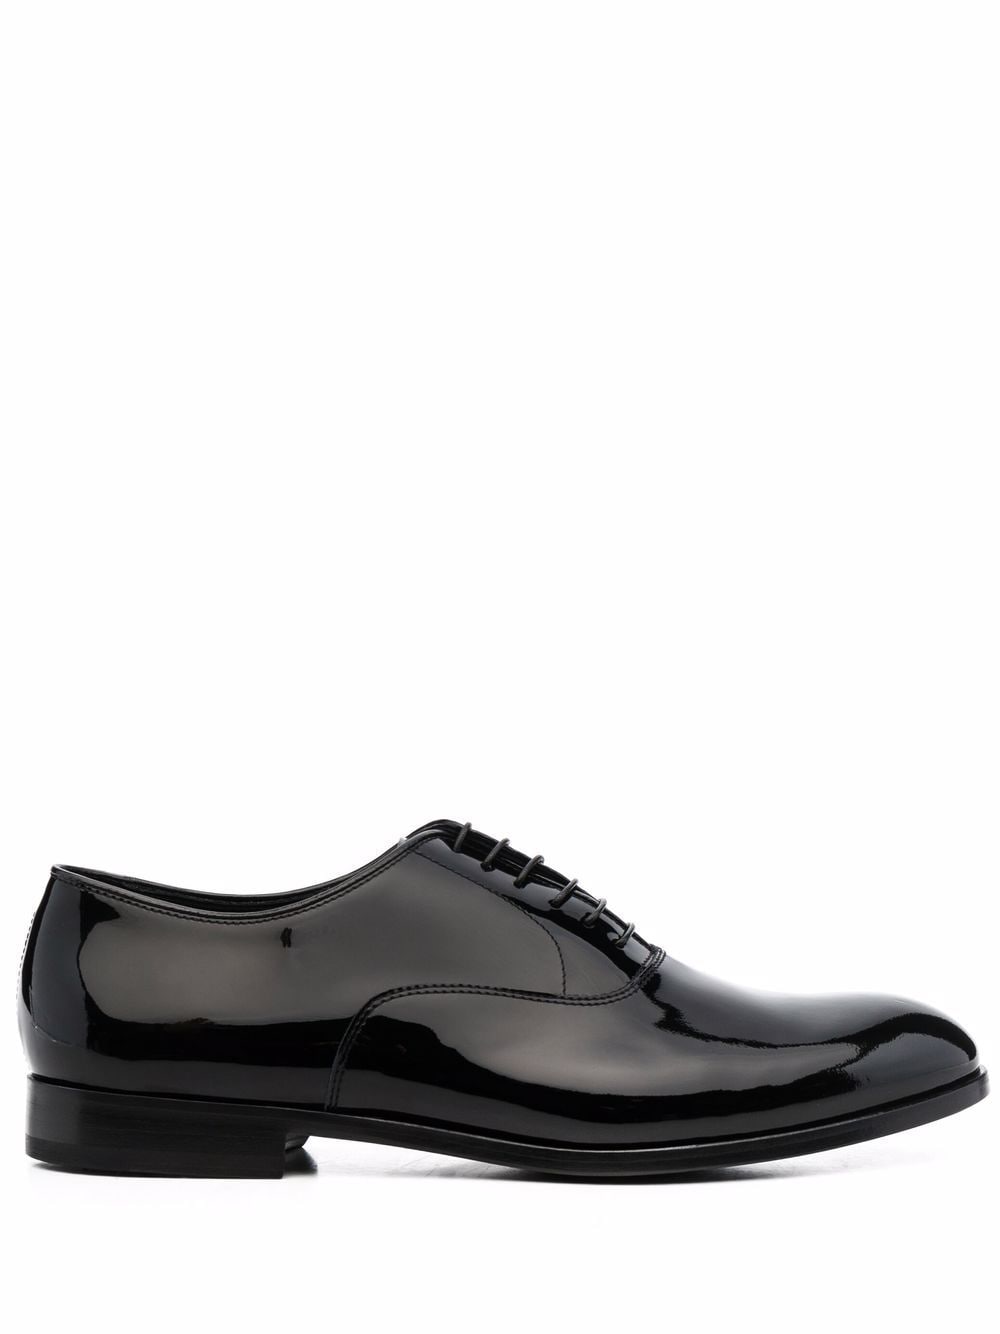 Doucal's pointed toe loafers - Black von Doucal's